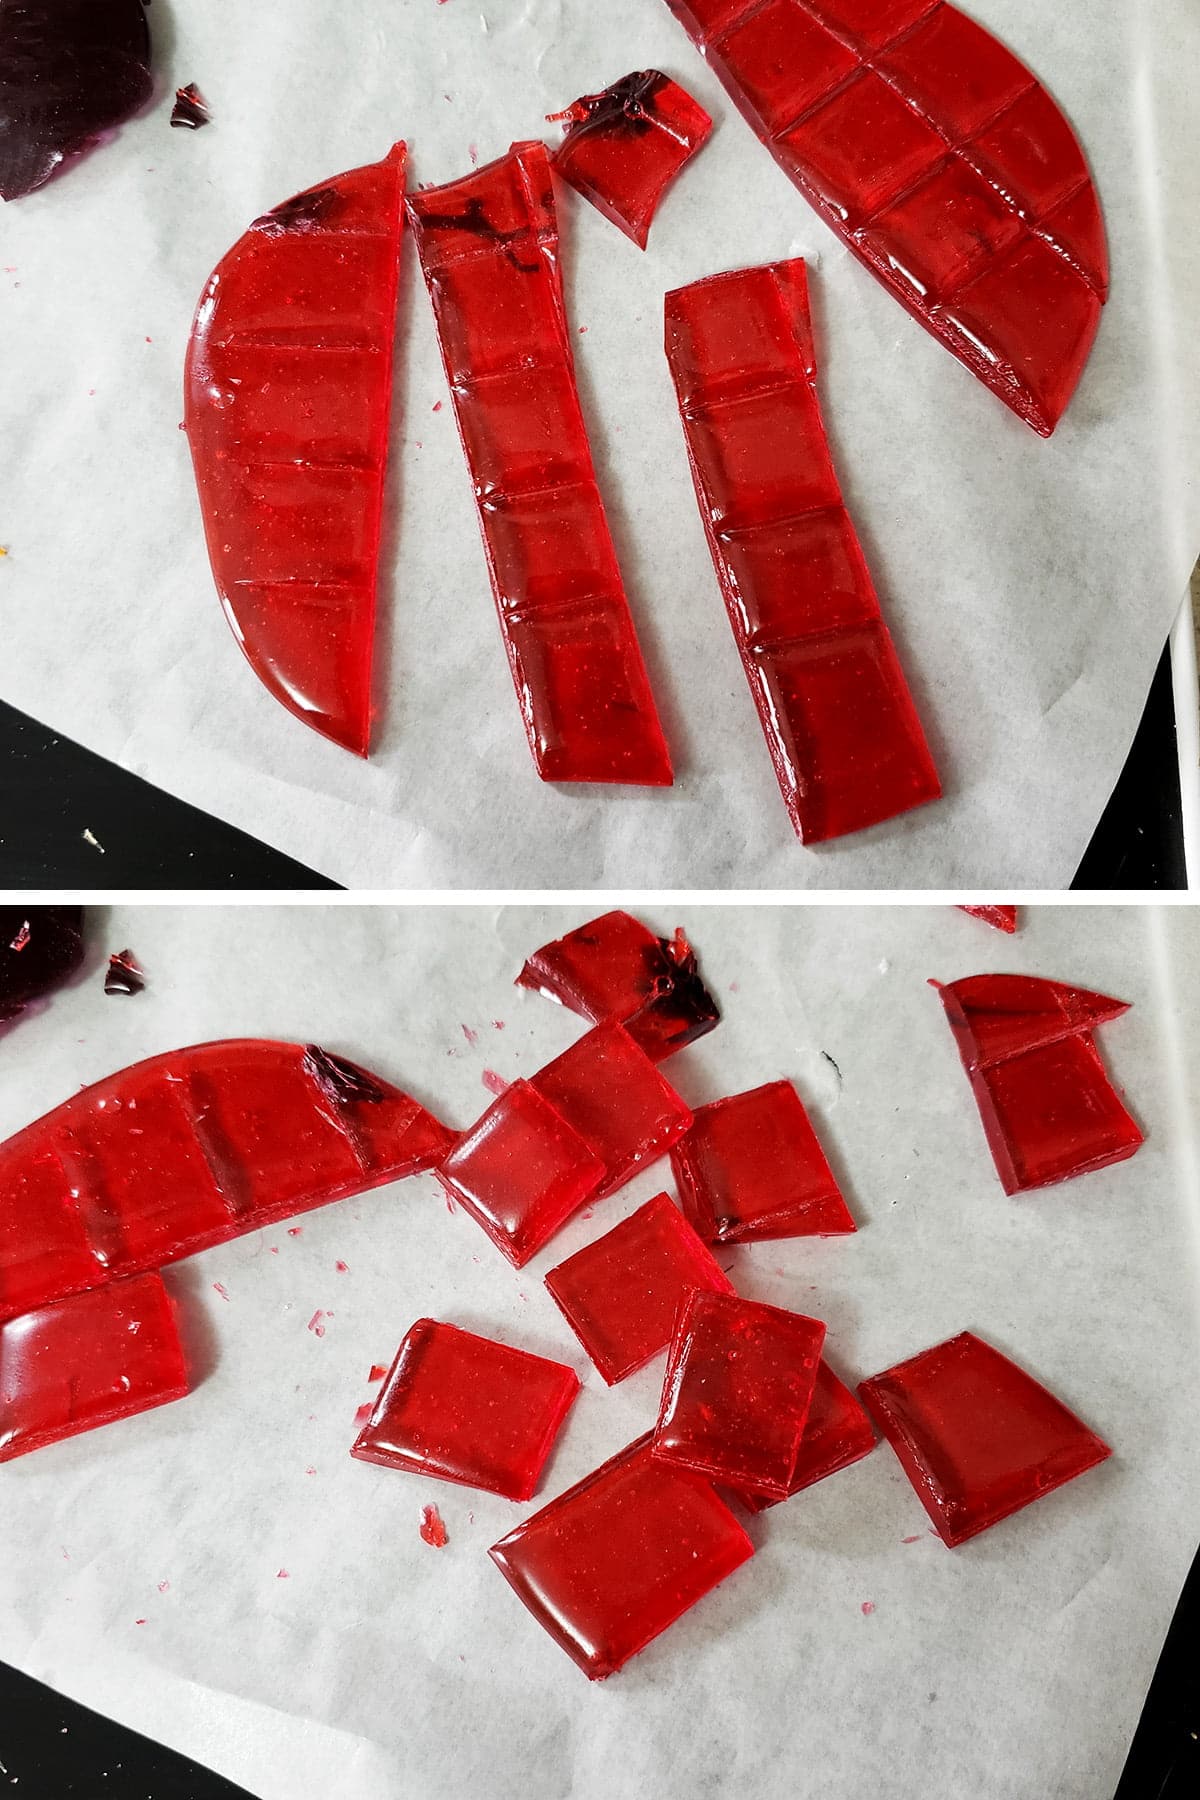 Strips of red hard candy are shown scored, then broken into squares.